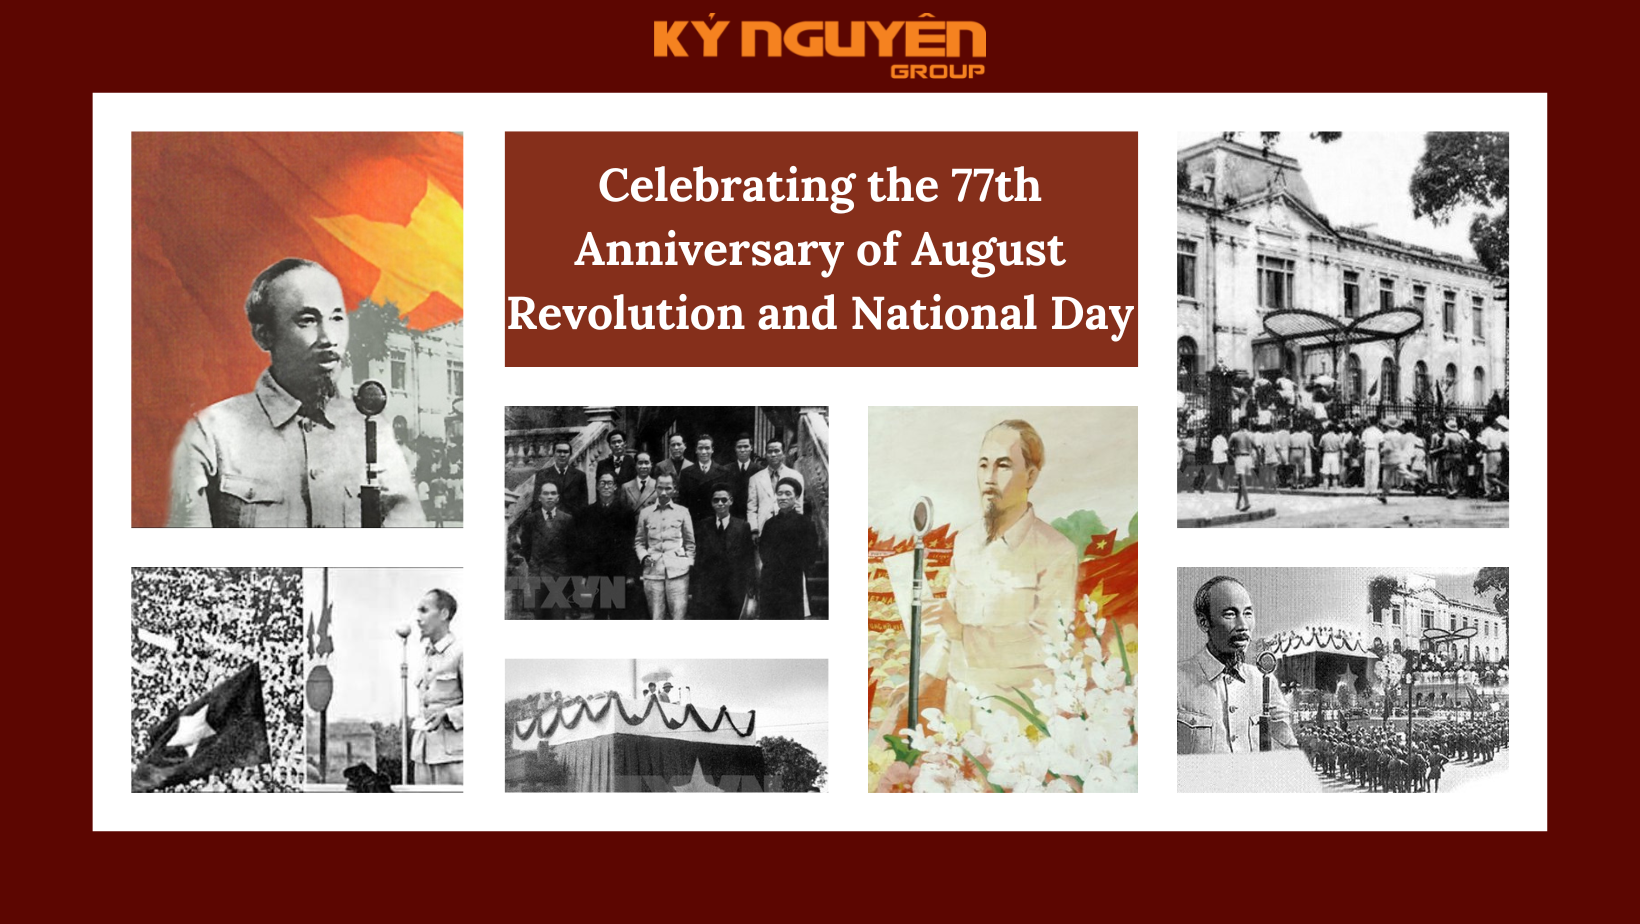 Celebrating the 77th Anniversary of August Revolution and National Day